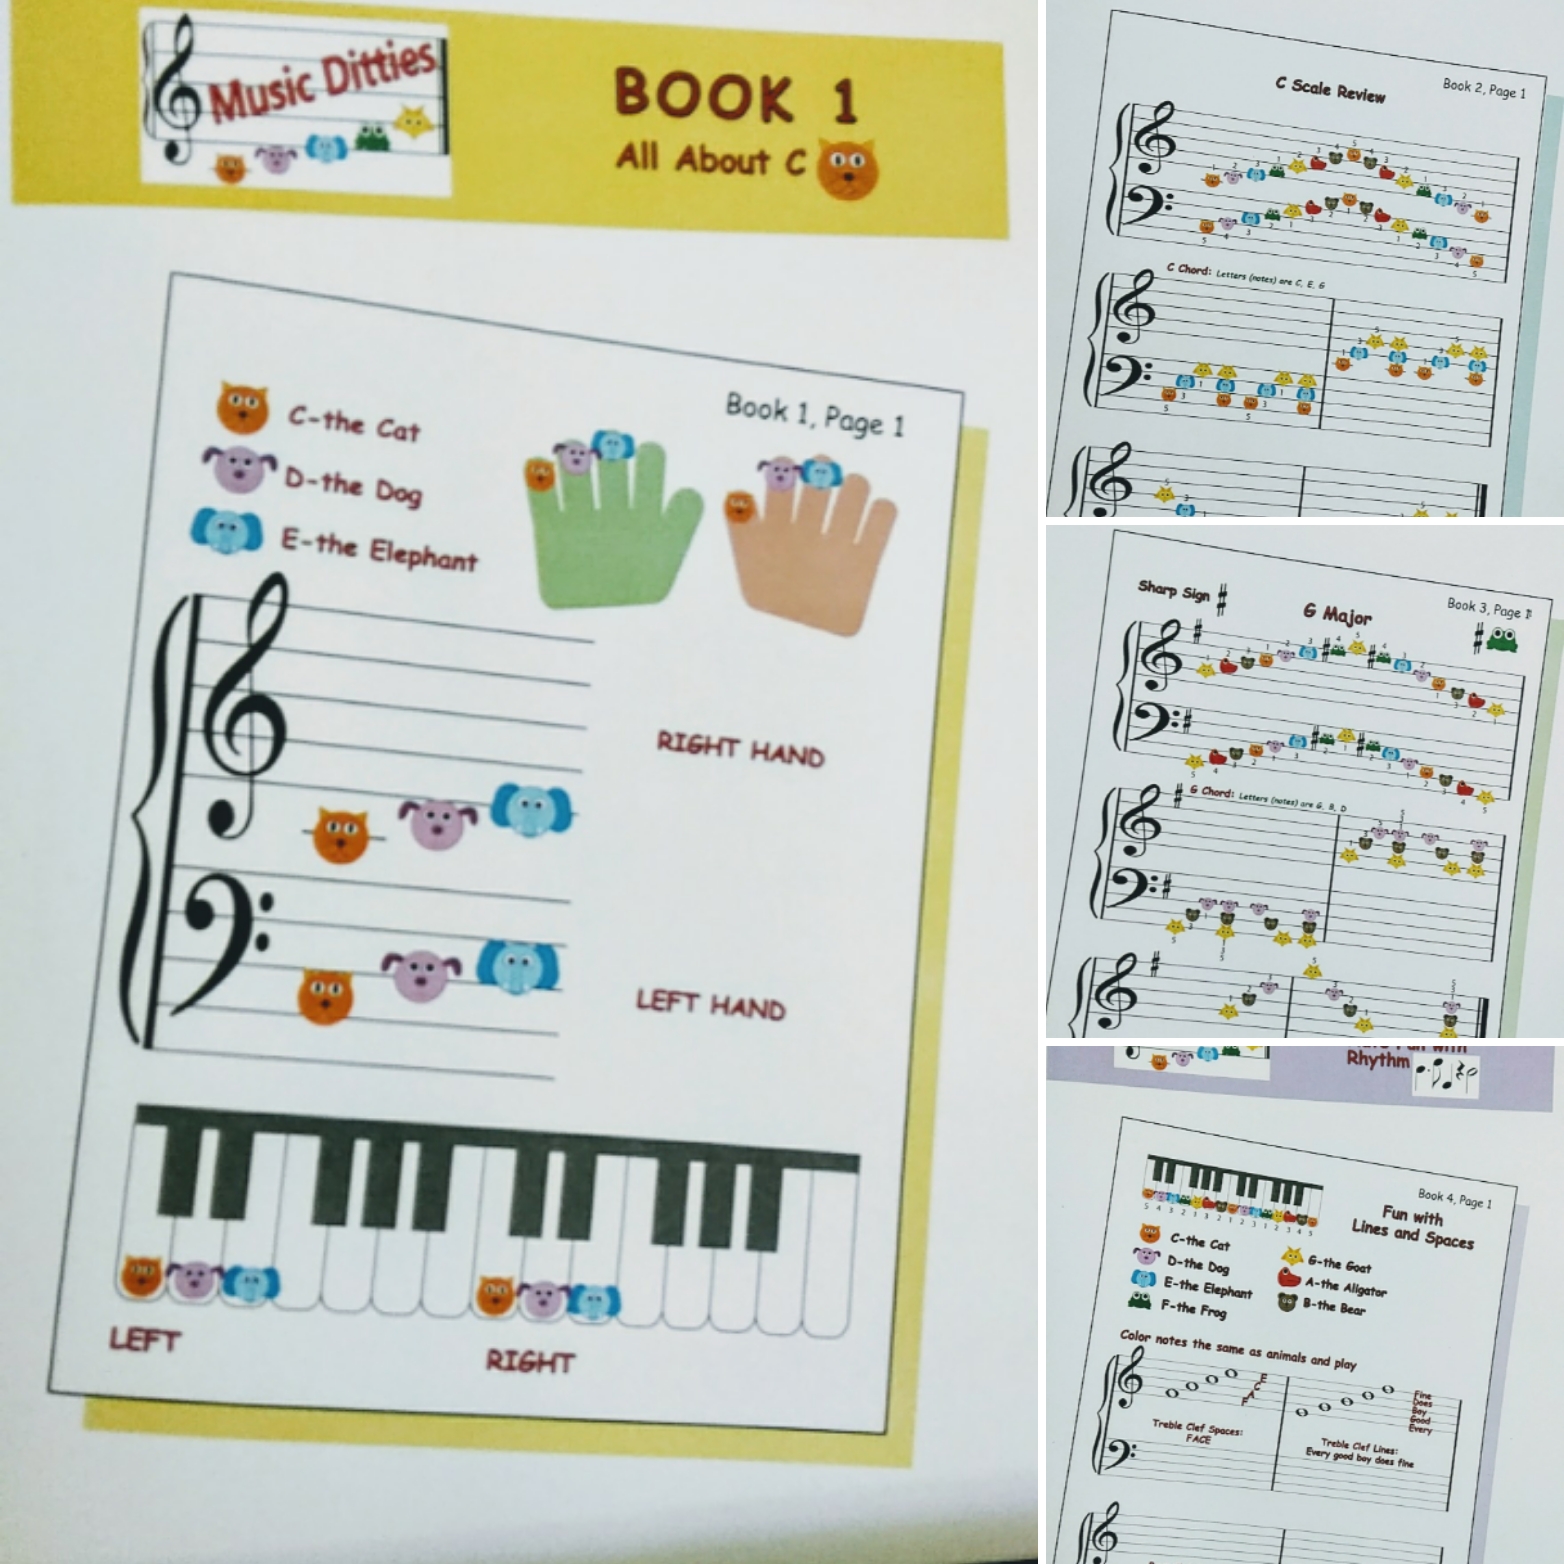 The set of books on Piano Lessons by Music Ditties